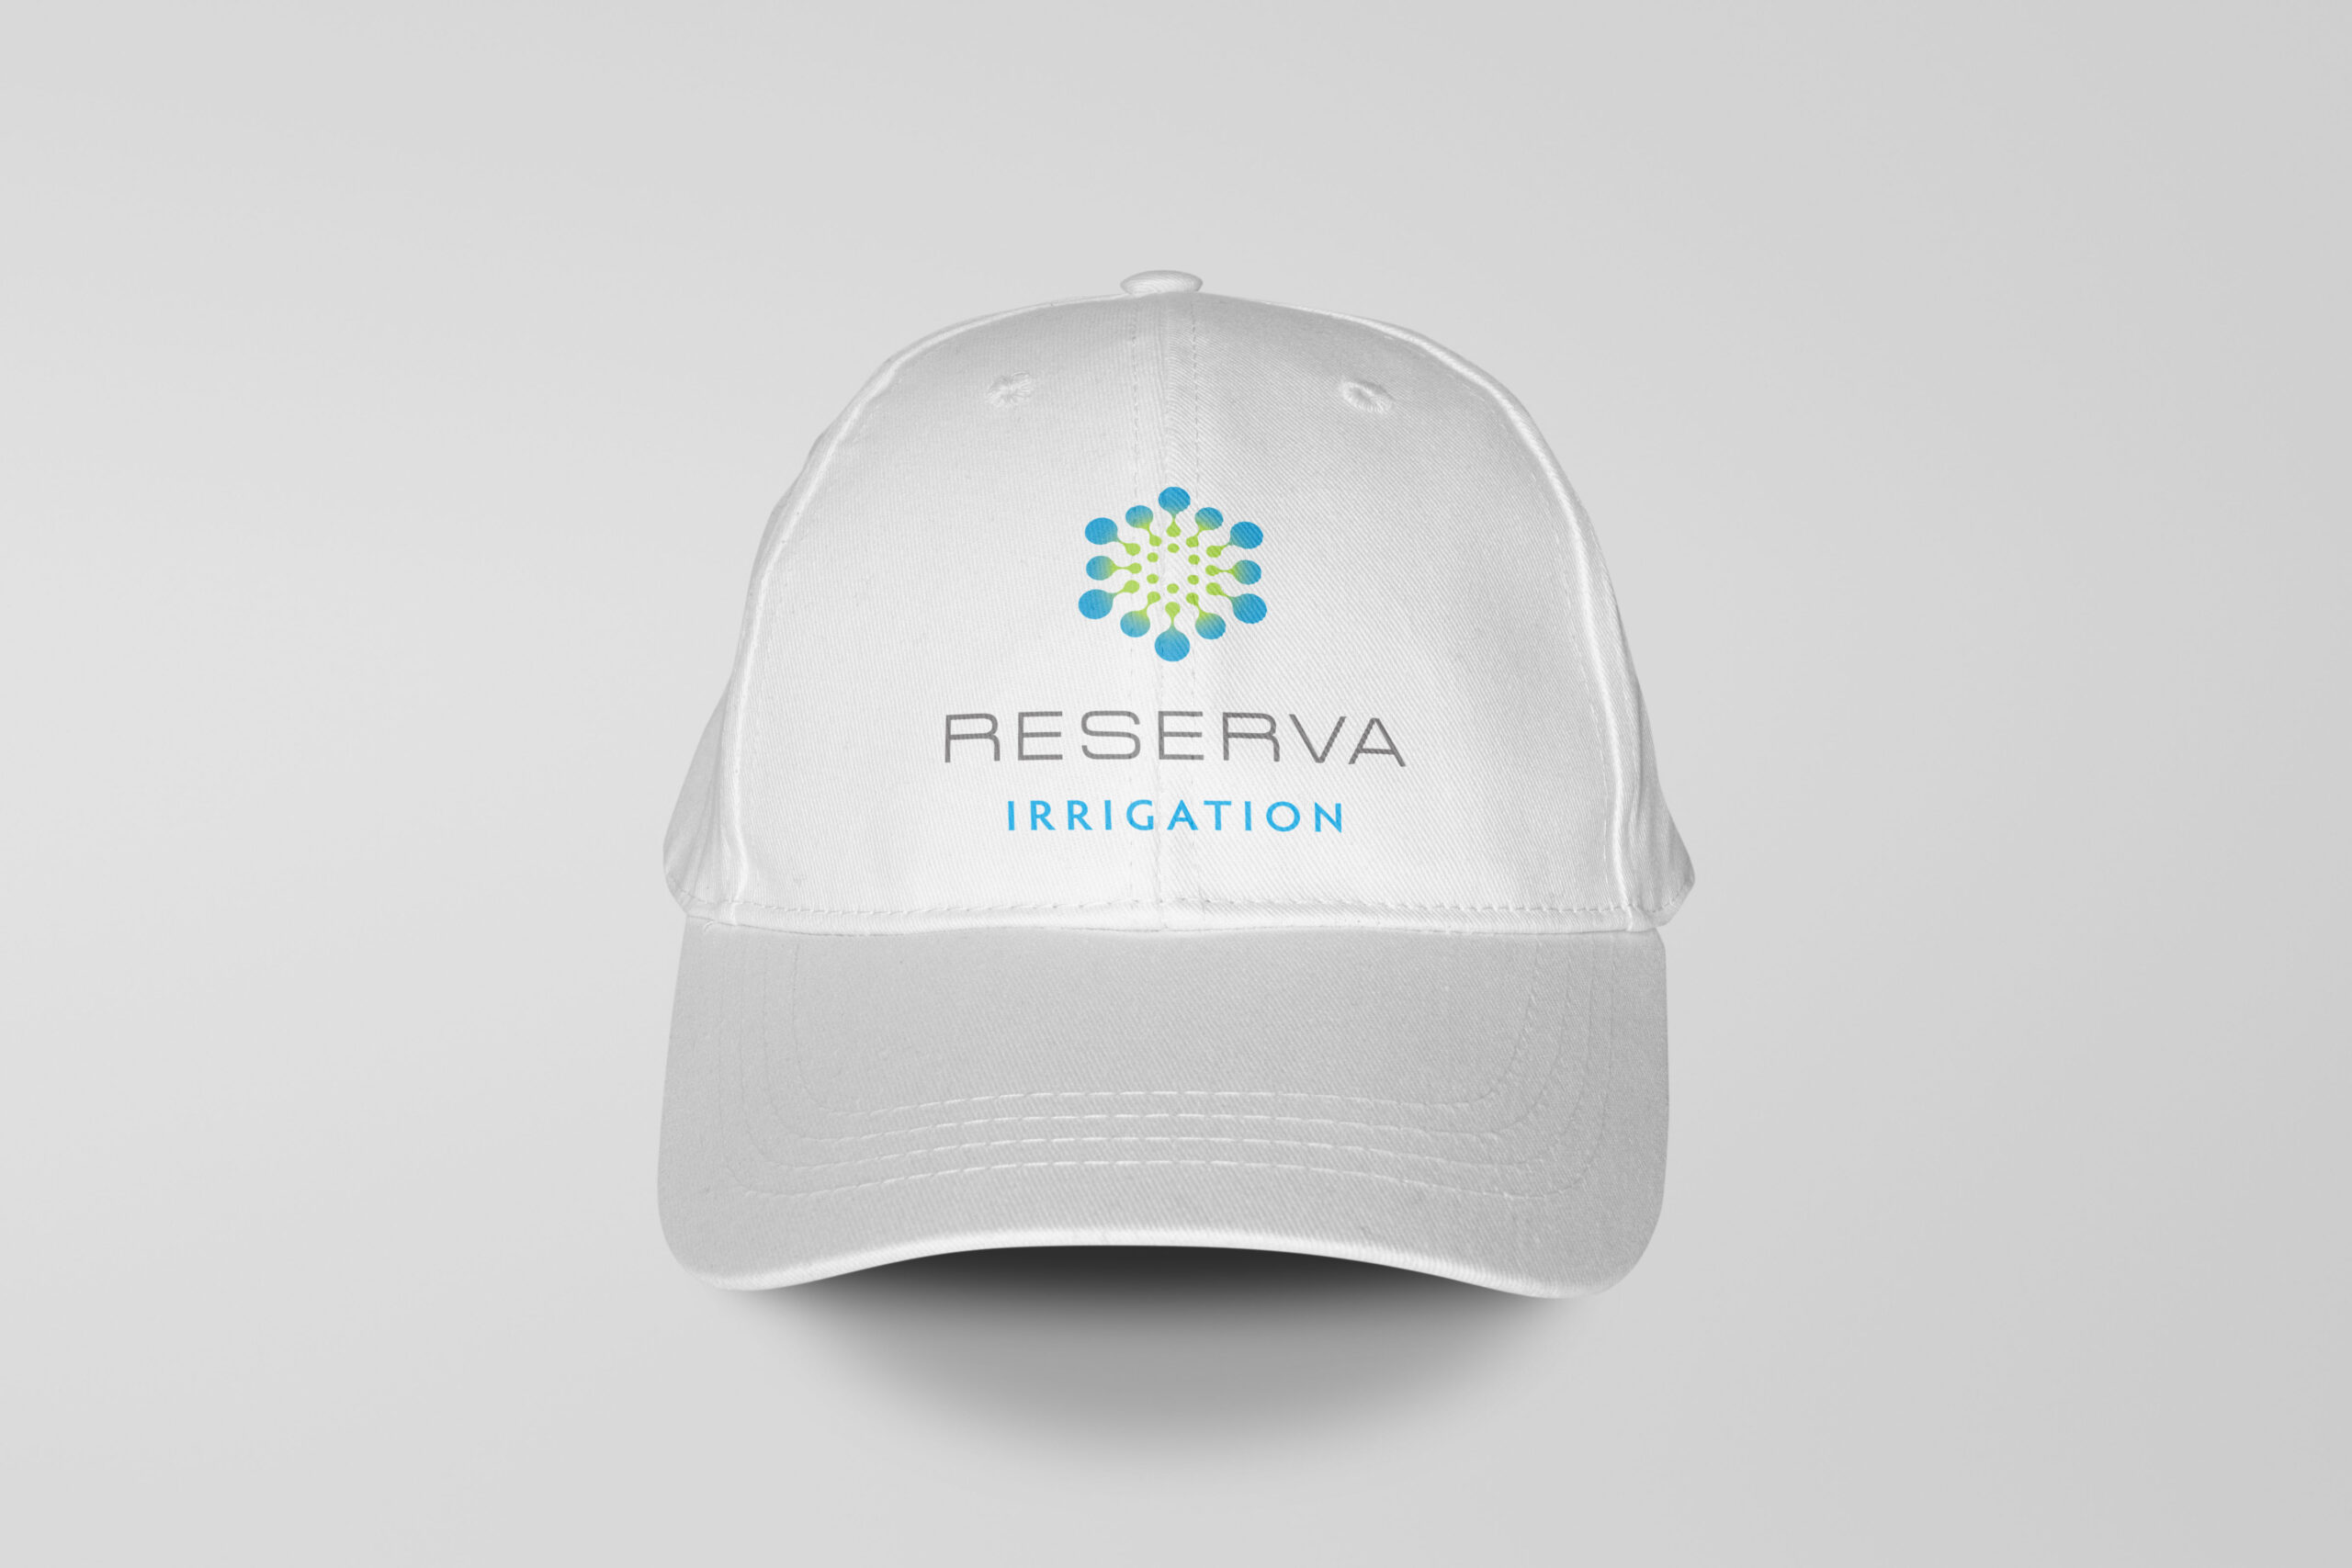 White baseball cap with the Reserva logo on it.